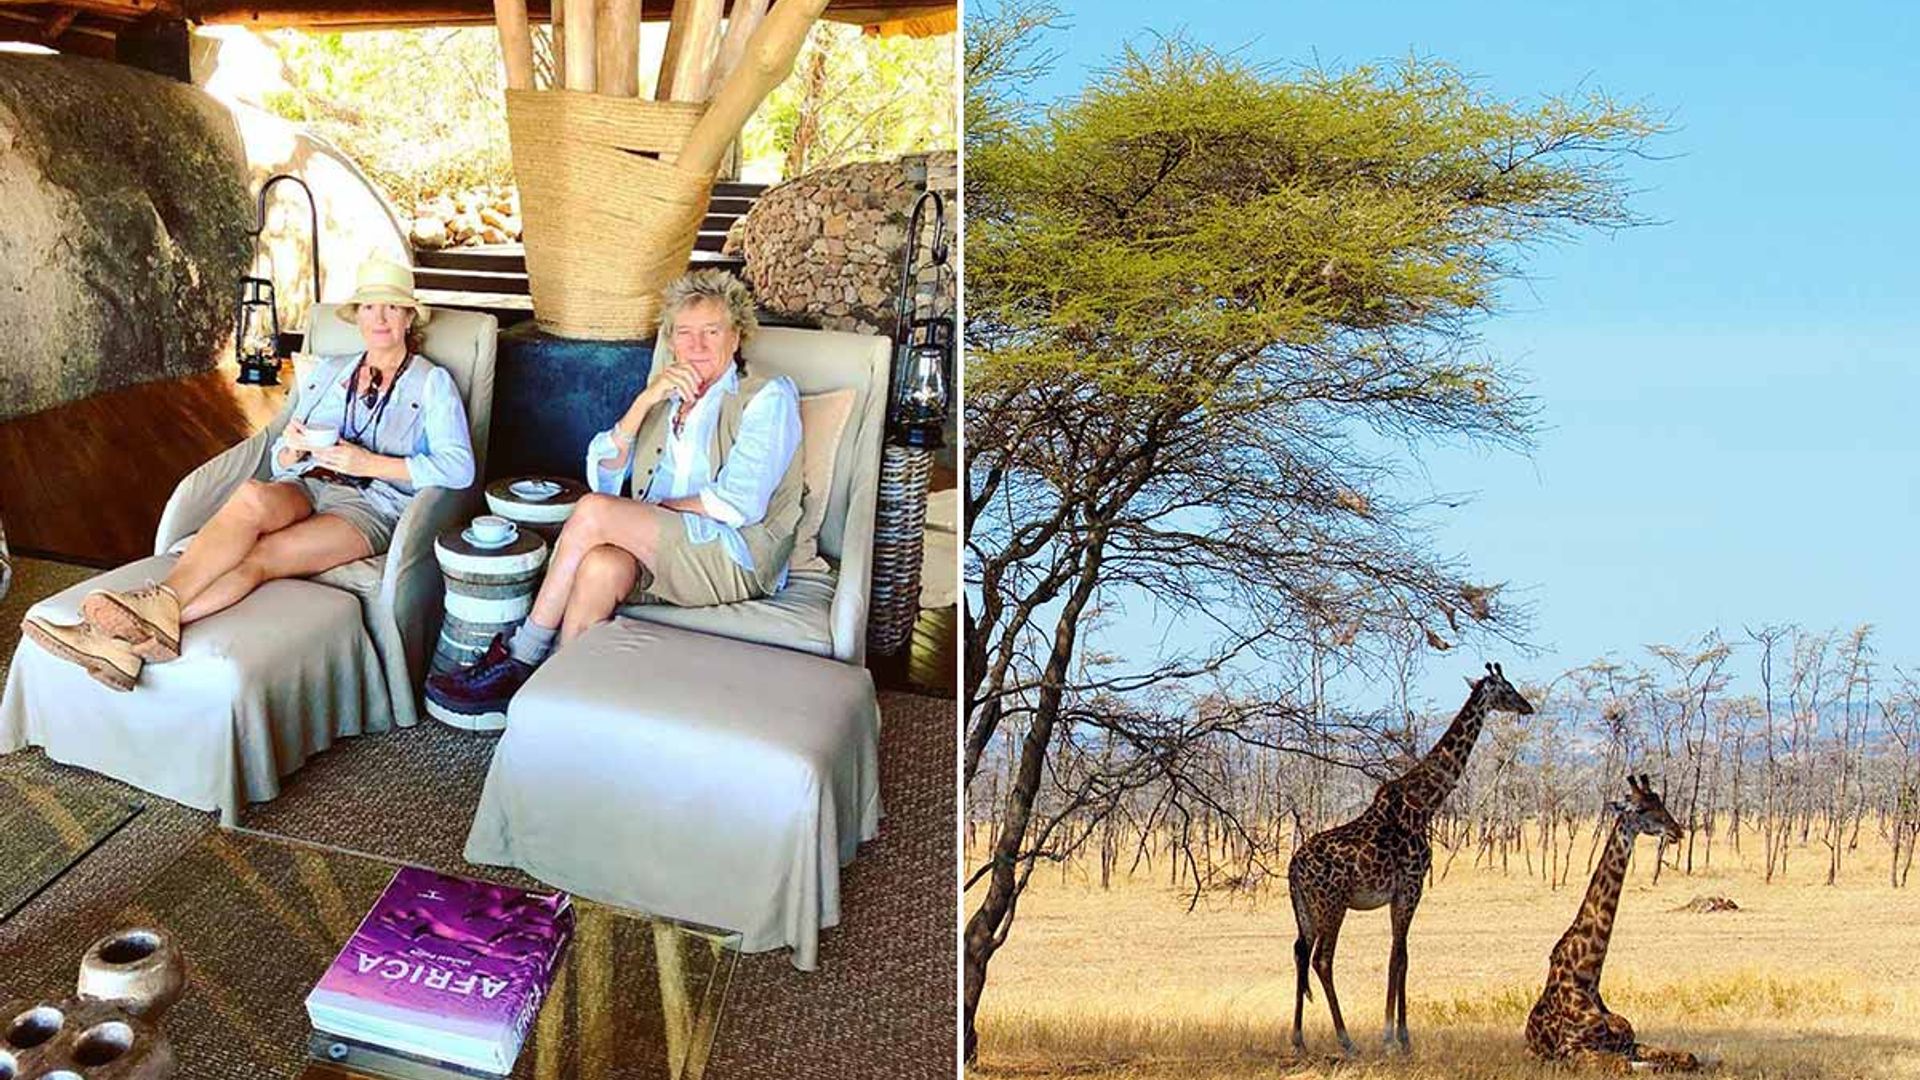 Rod Stewart and Penny Lancaster enjoy family holiday at this gorgeous luxury lodge in Tanzania